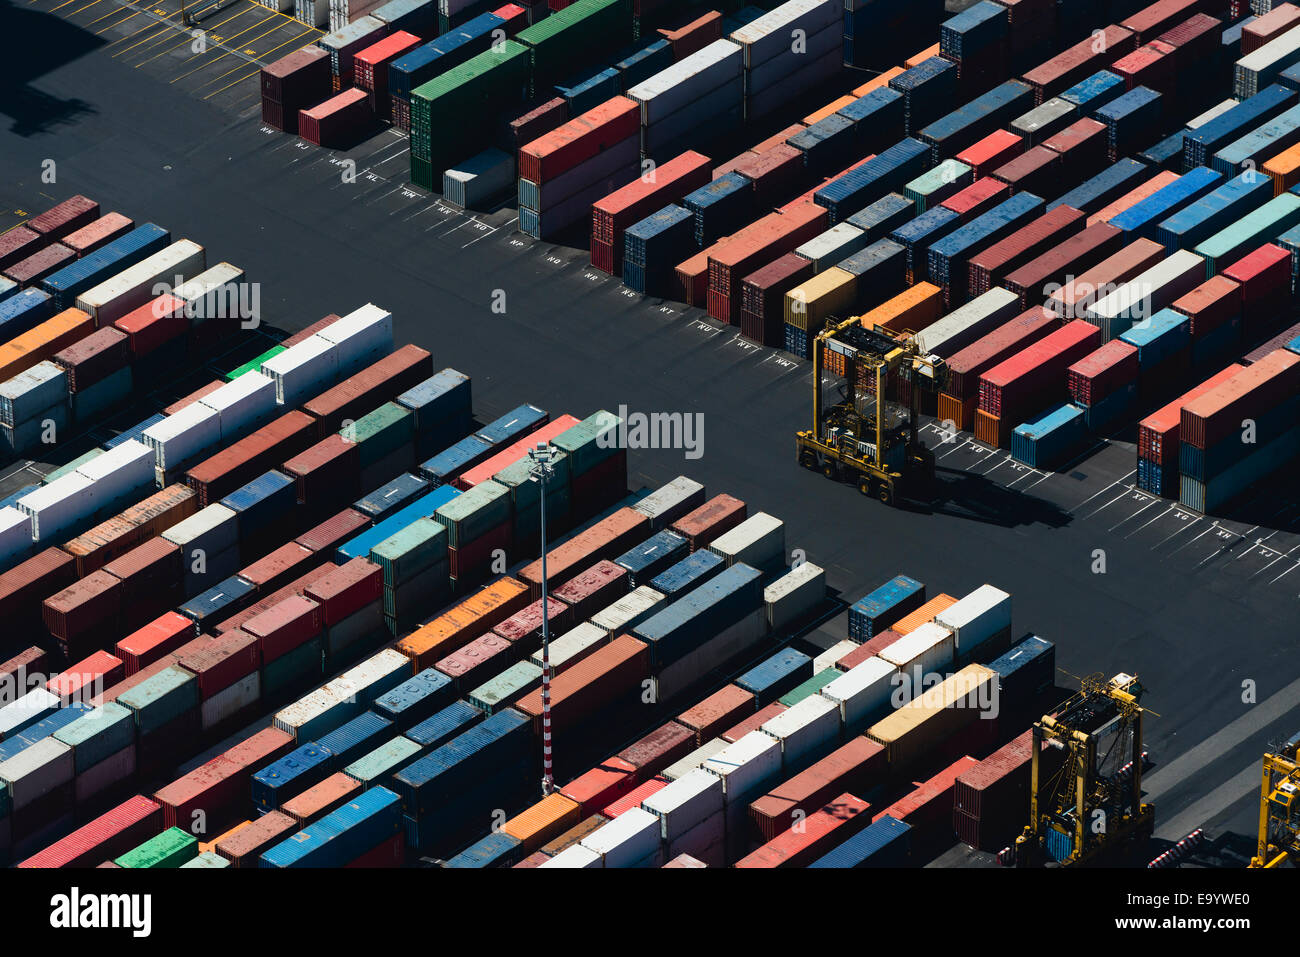 Aerial view of angled cargo containers, Port Melbourne, Melbourne, Victoria, Australia Stock Photo